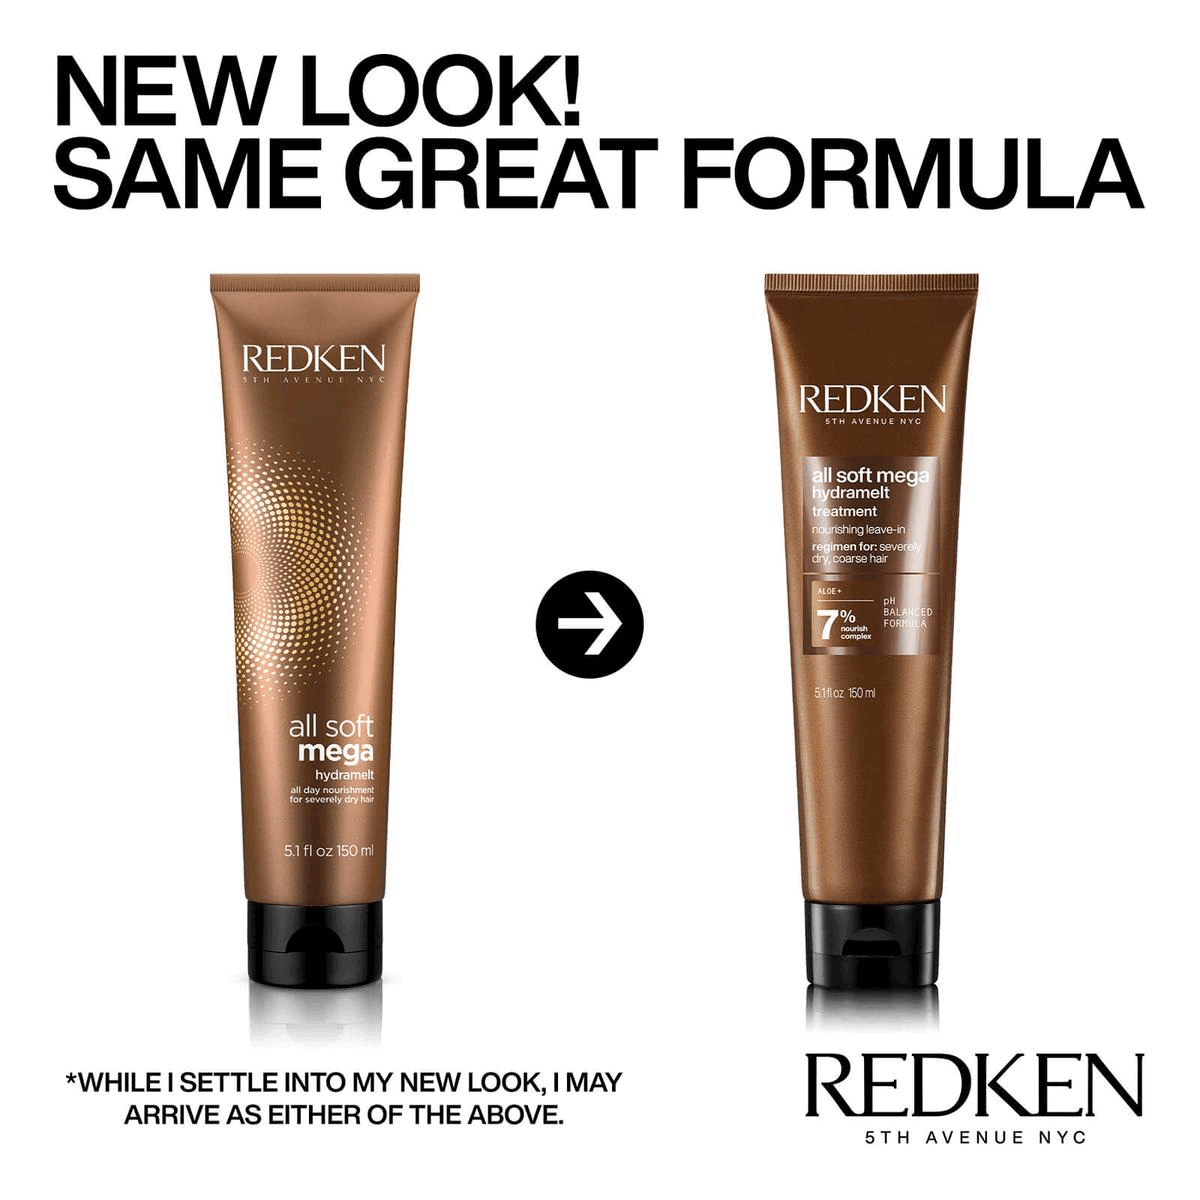 Image 1, NEW LOOK! SAME GREAT FORMULA *WHILE I SETTLE INTO MY NEW LOOK, I MAY
              ARRIVE AS EITHER OF THE ABOVE. (image showing old packaging) REDKEN 5TH AVENUE NYC Image 2, ALOE + NOURISH COMPLEX
              HELPS TO NOURISH & DETANGLE SEVERELY DRY HAIR REDKEN 5TH AVENUE NYC Image 3, LIGHTWEIGHT, LEAVE-IN MOISTURIZING LOTION, SOFTENS & MOISTURIZES HAIR, PROVIDES CONTROL & SHINE 5TH AVENUE NYC